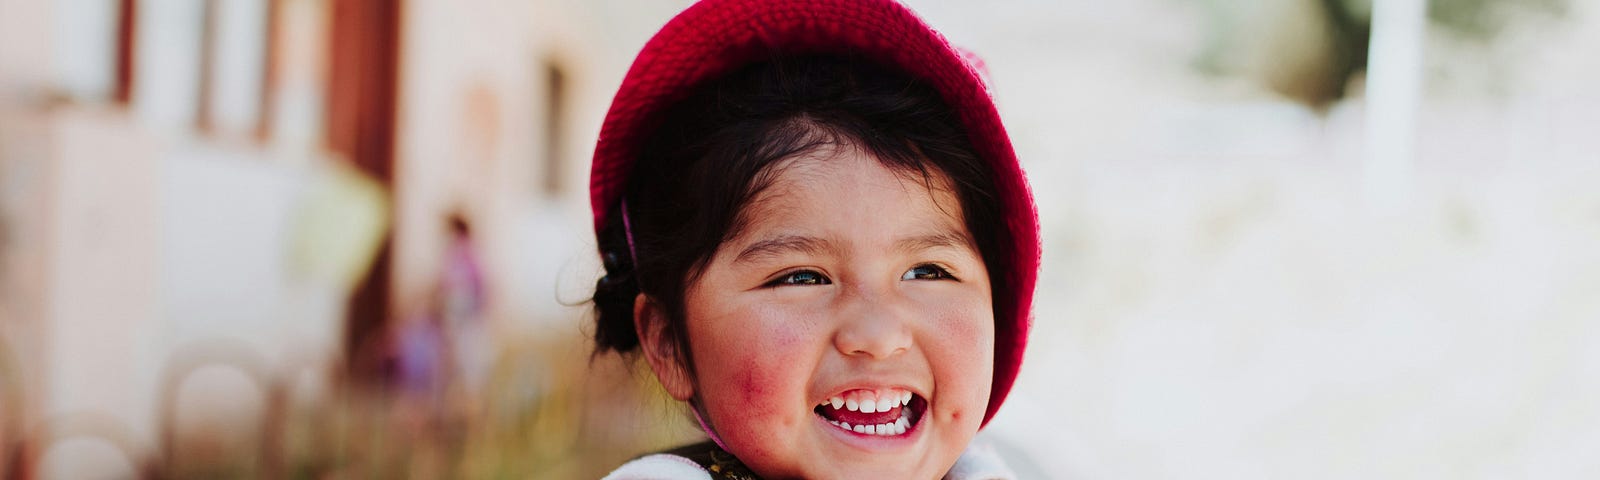 A happy child wearing a red bonnet, a checkered red and white coat, and a joyous smile.